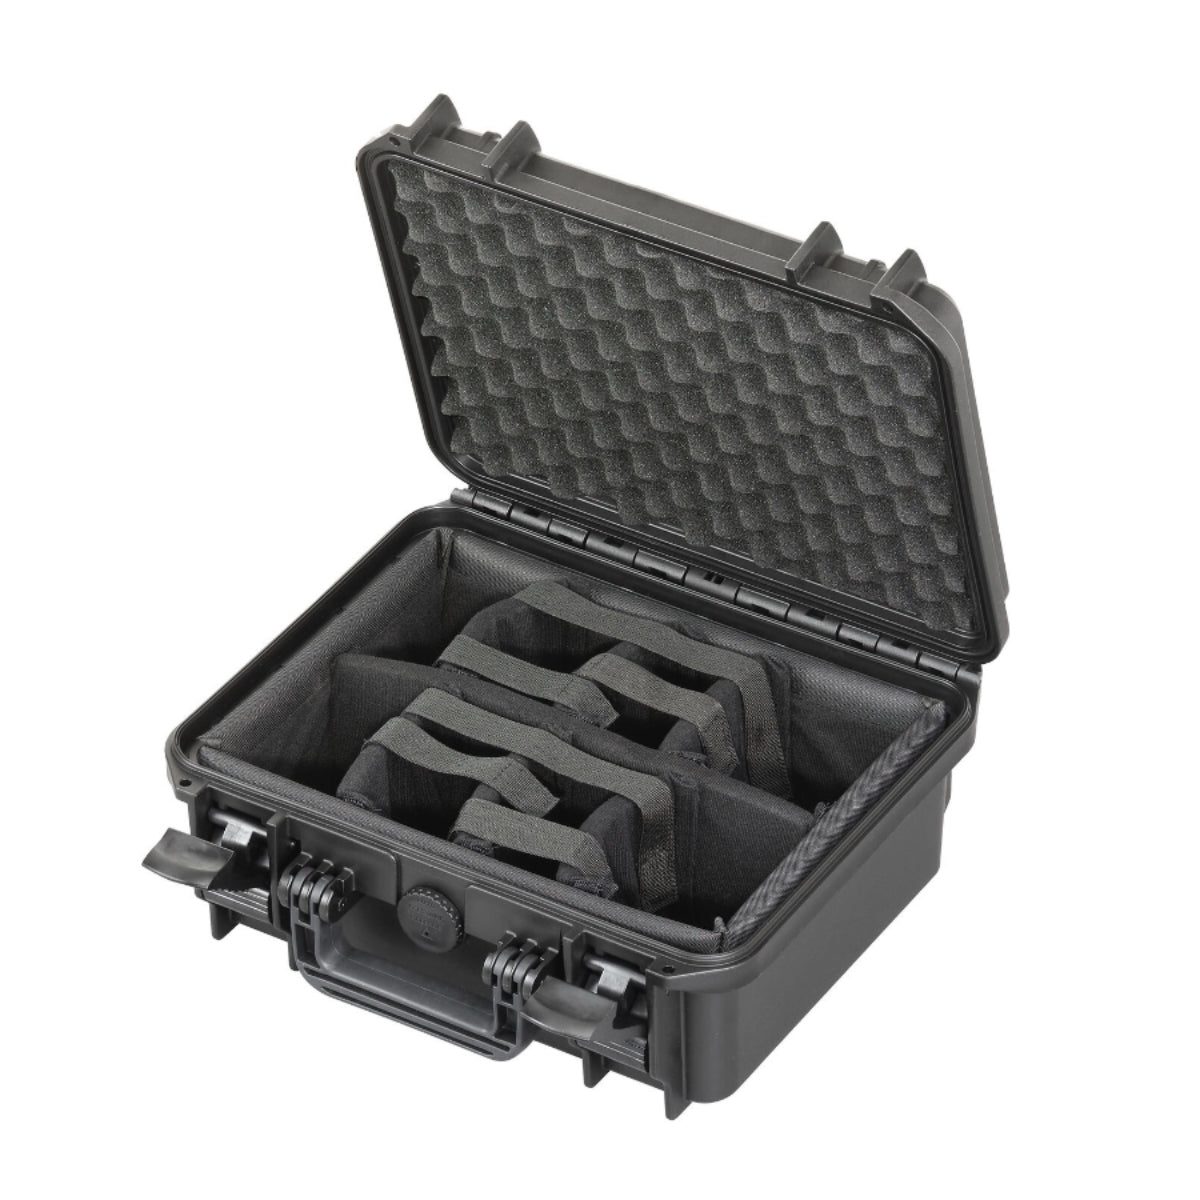 SP PRO 300CAM Black Carry Case, Padded Dividers, ID: L300xW225xH132mm